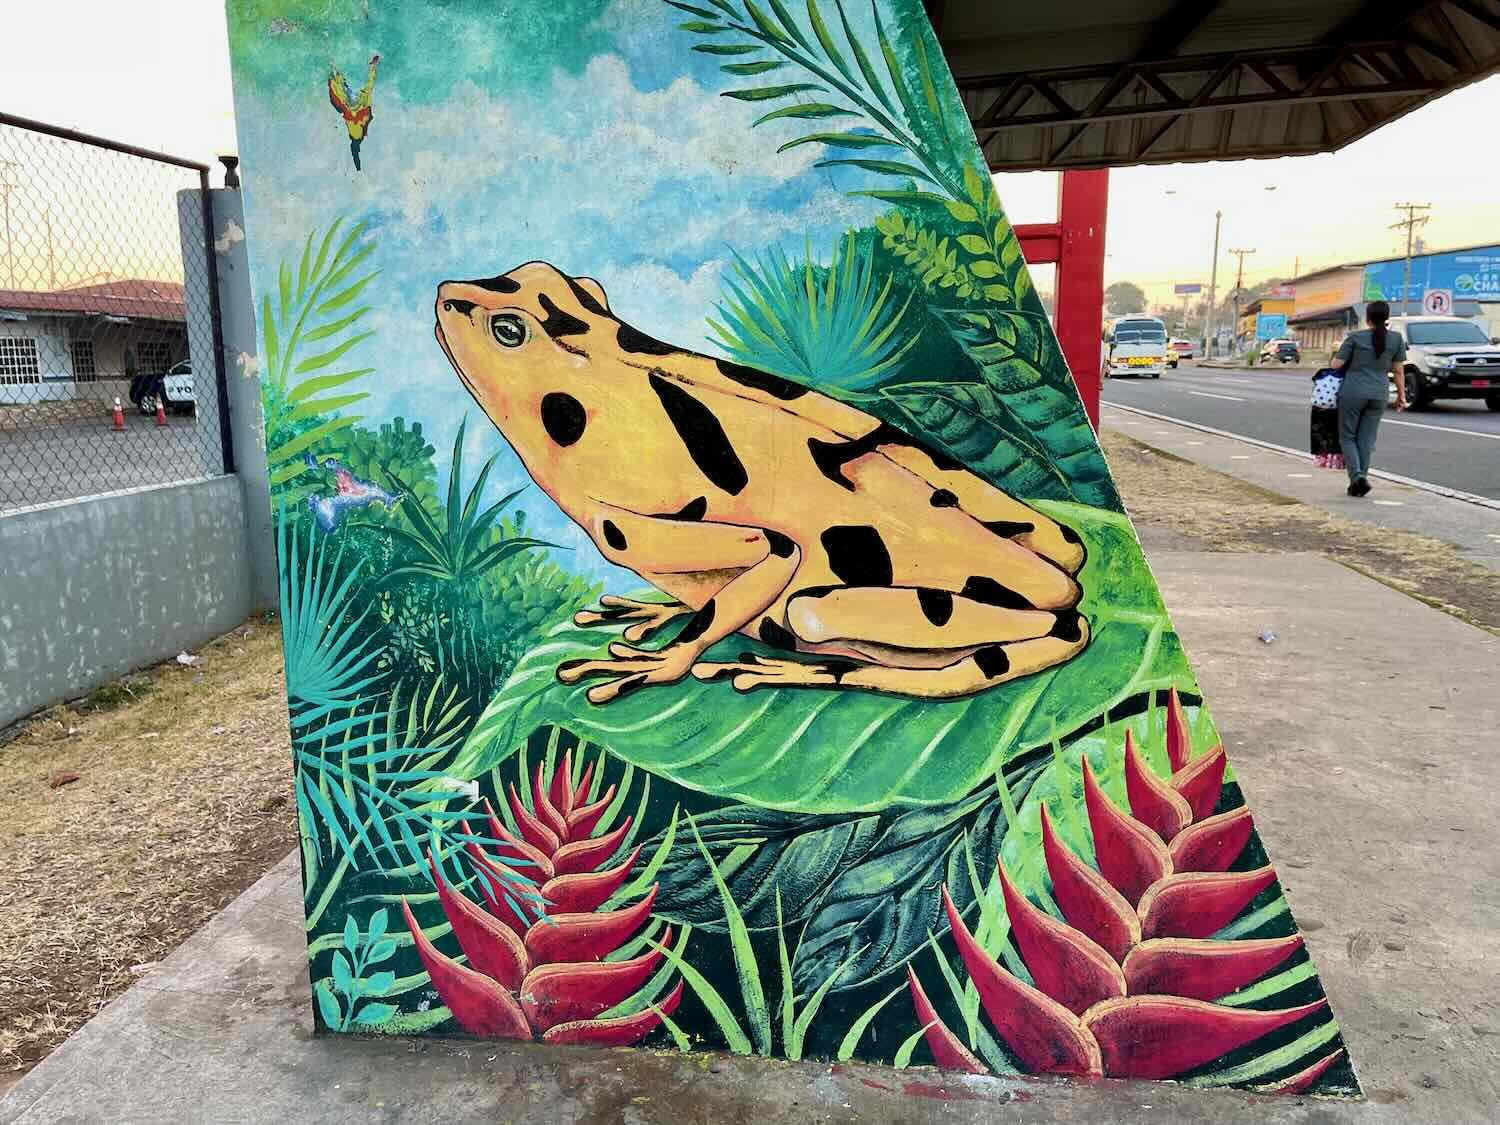 The Panamanian golden frog is the country’s national animal. It’s considered good luck, even though they are so poisonous that even touching a wild frog can be dangerous